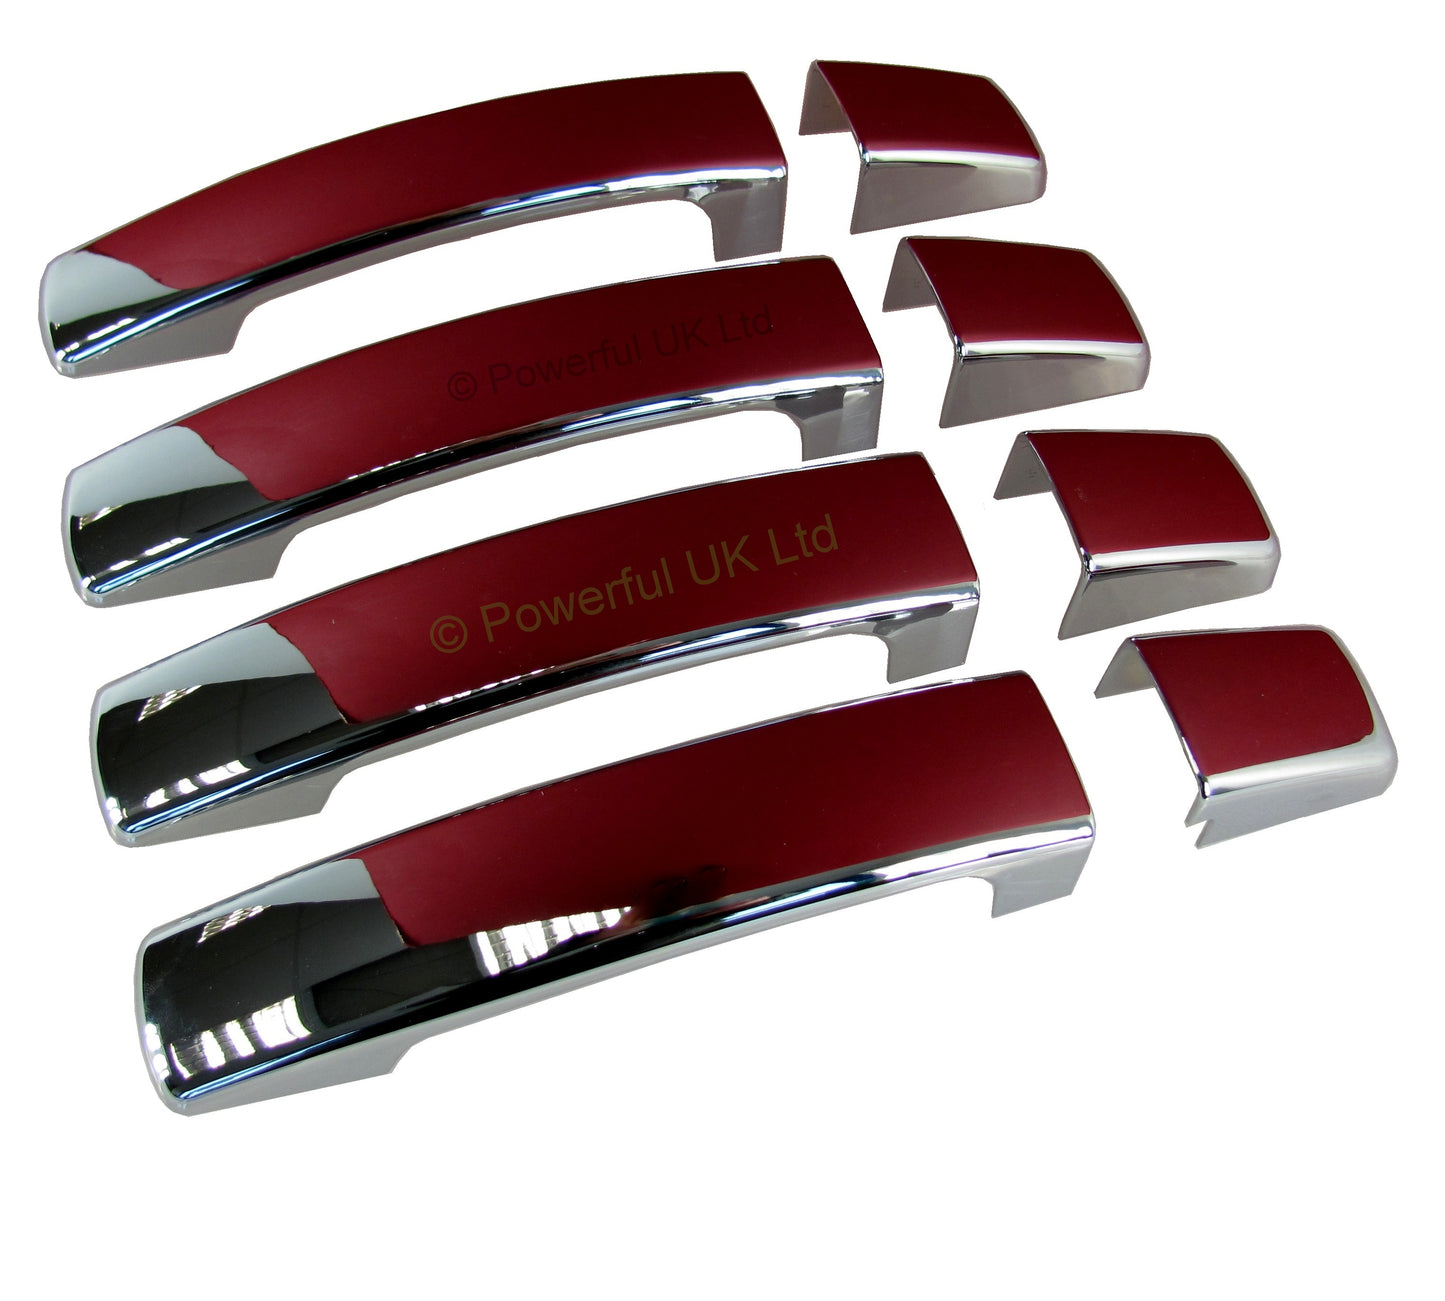 Door Handle Covers for Land Rover Freelander 2 fitted with 1 pc Handles  - Chrome